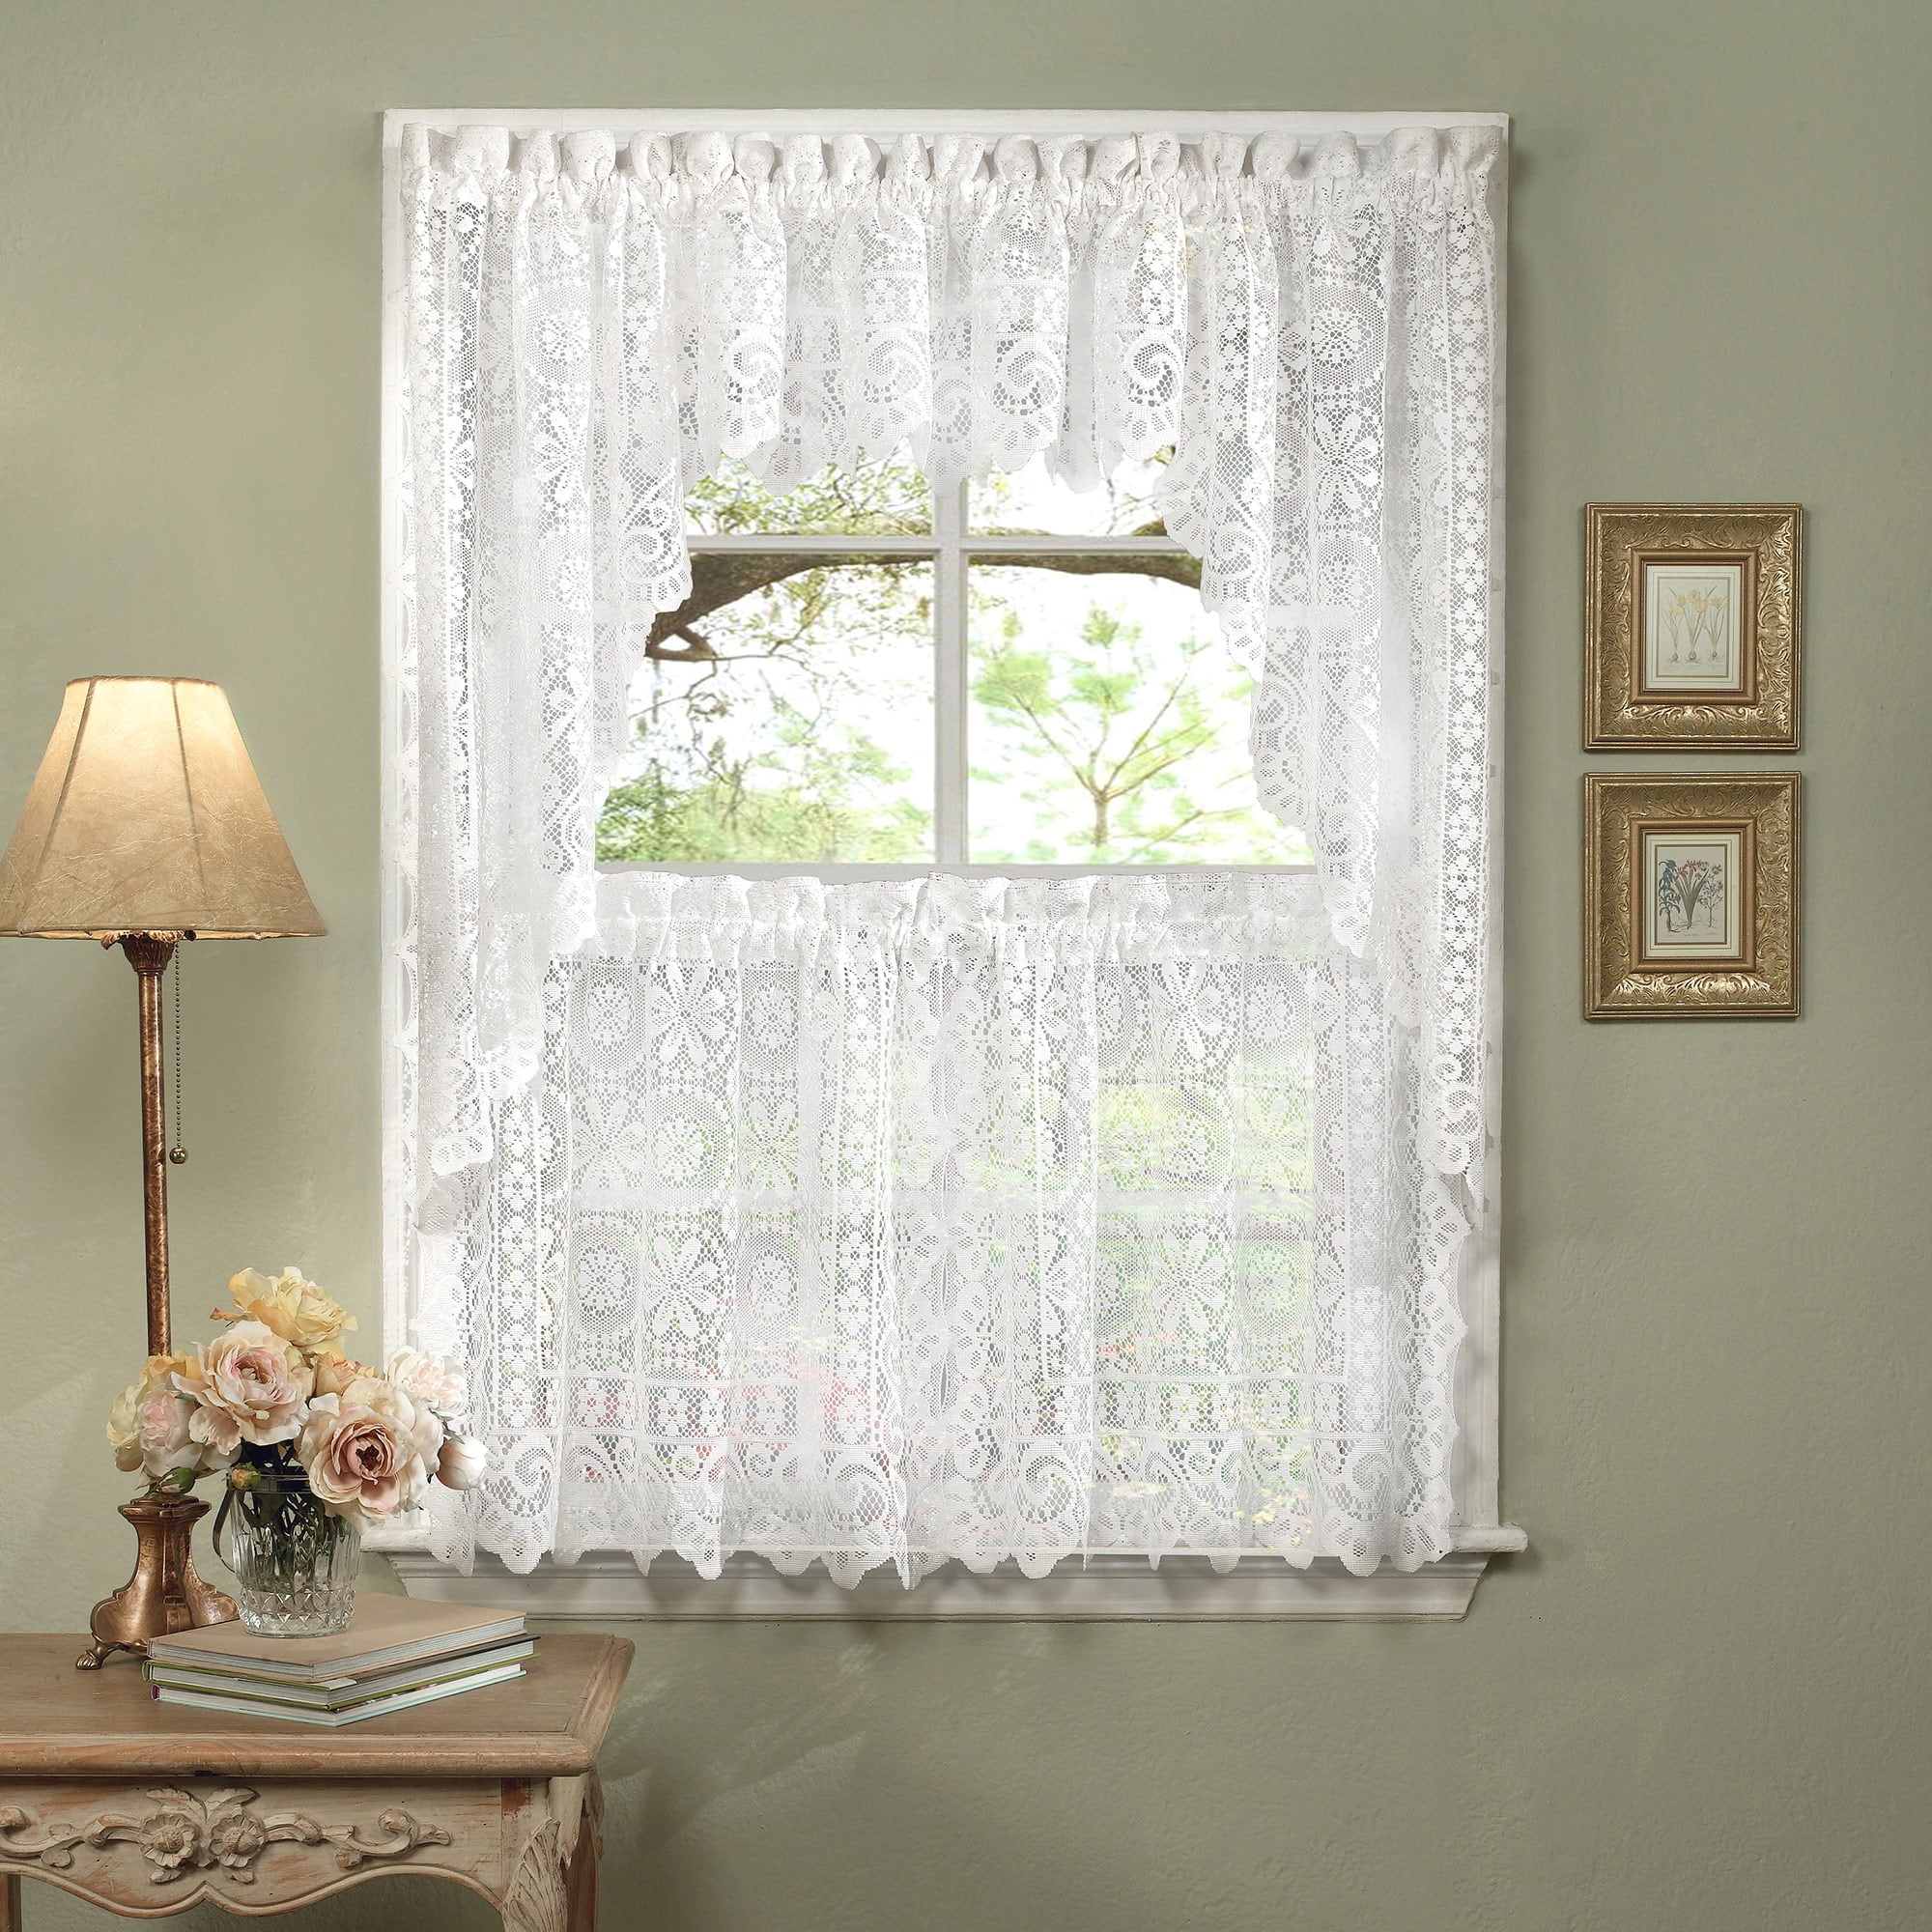 Elegant Ivory Priscilla Lace Kitchen Curtains Tiers Tailored Valance or Swag 